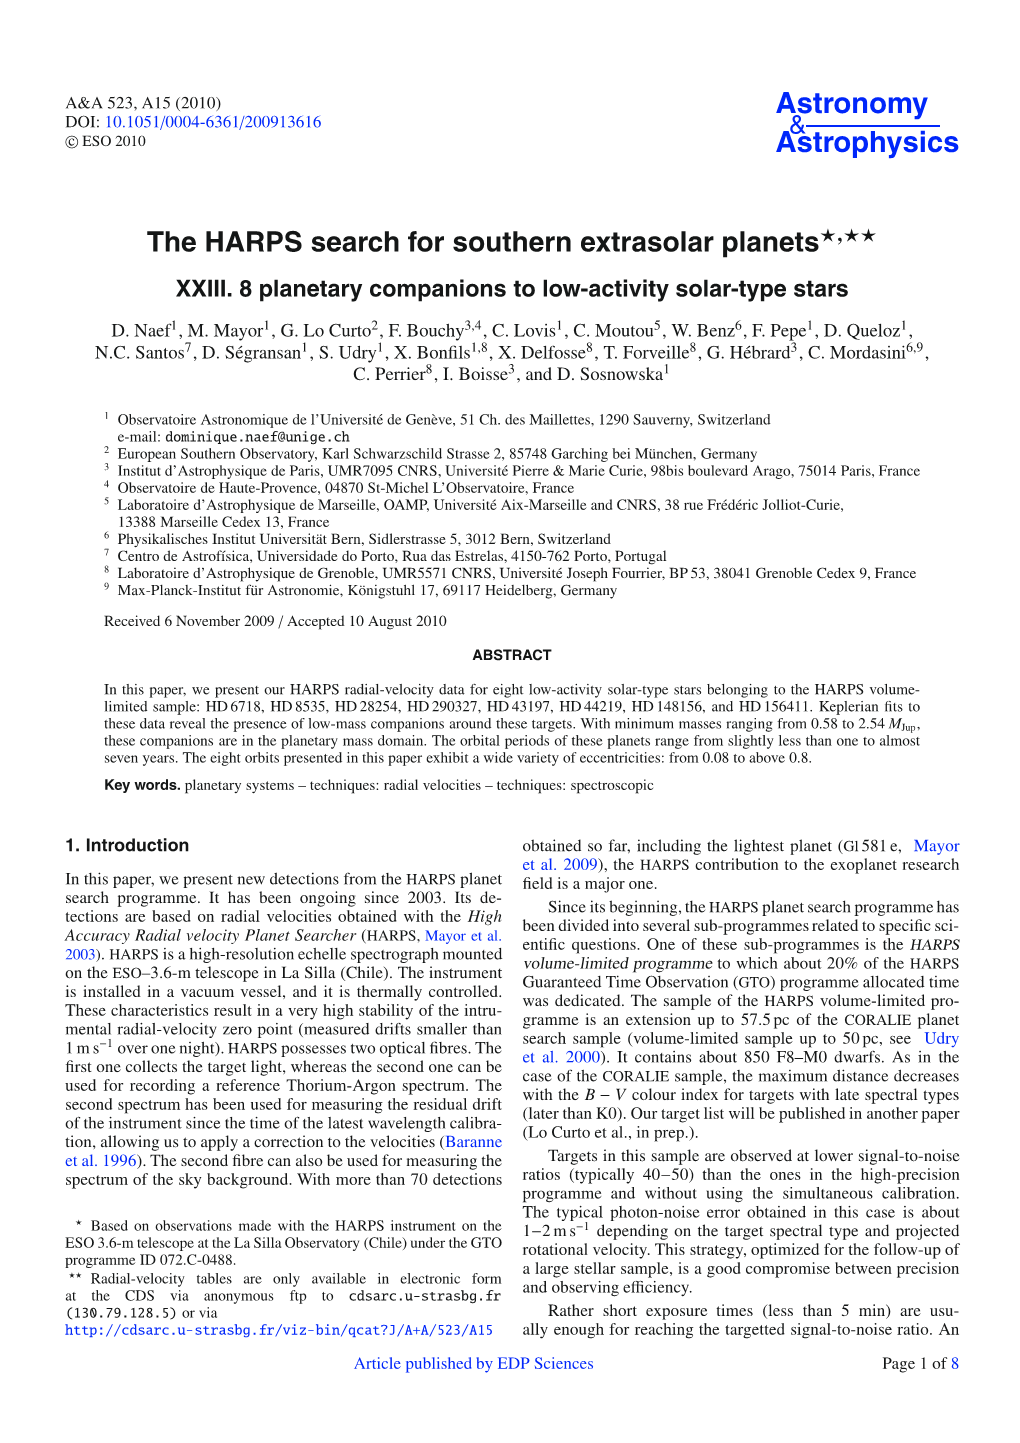 The HARPS Search for Southern Extrasolar Planets�,�� XXIII